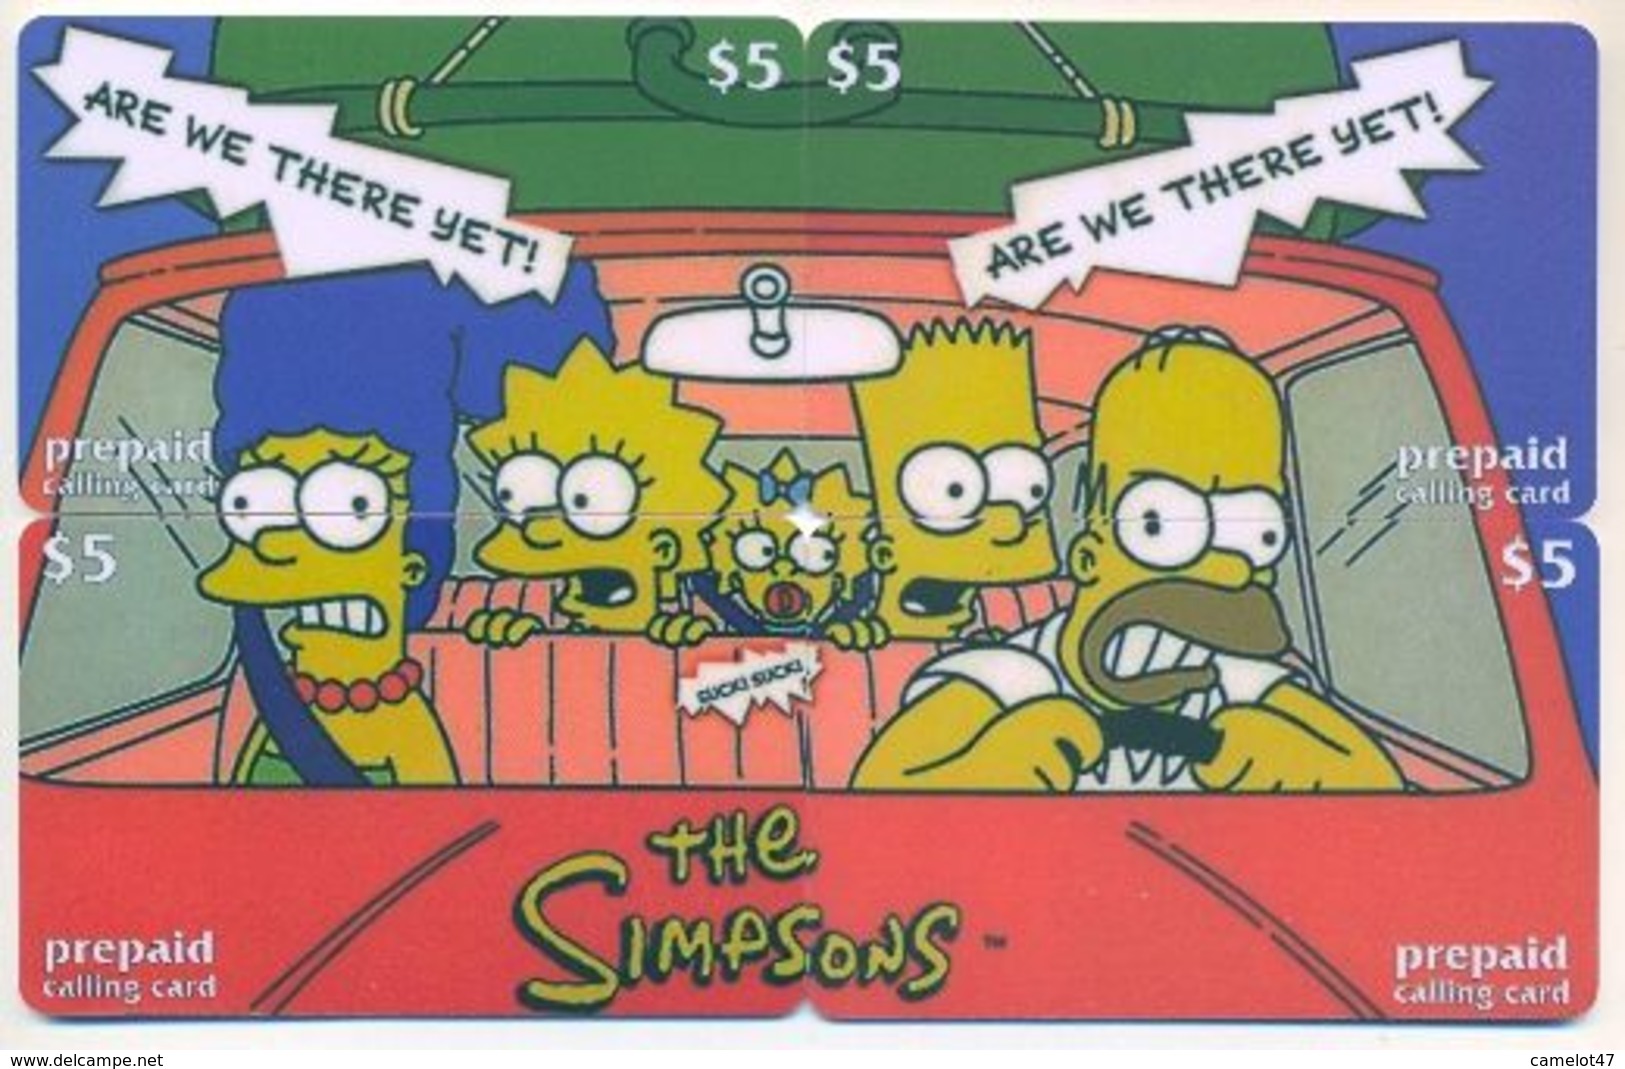 The Simpsons, $5, LDPC, 4 Prepaid Calling Cards, PROBABLY FAKE, # Simpsons-2 - Puzzles